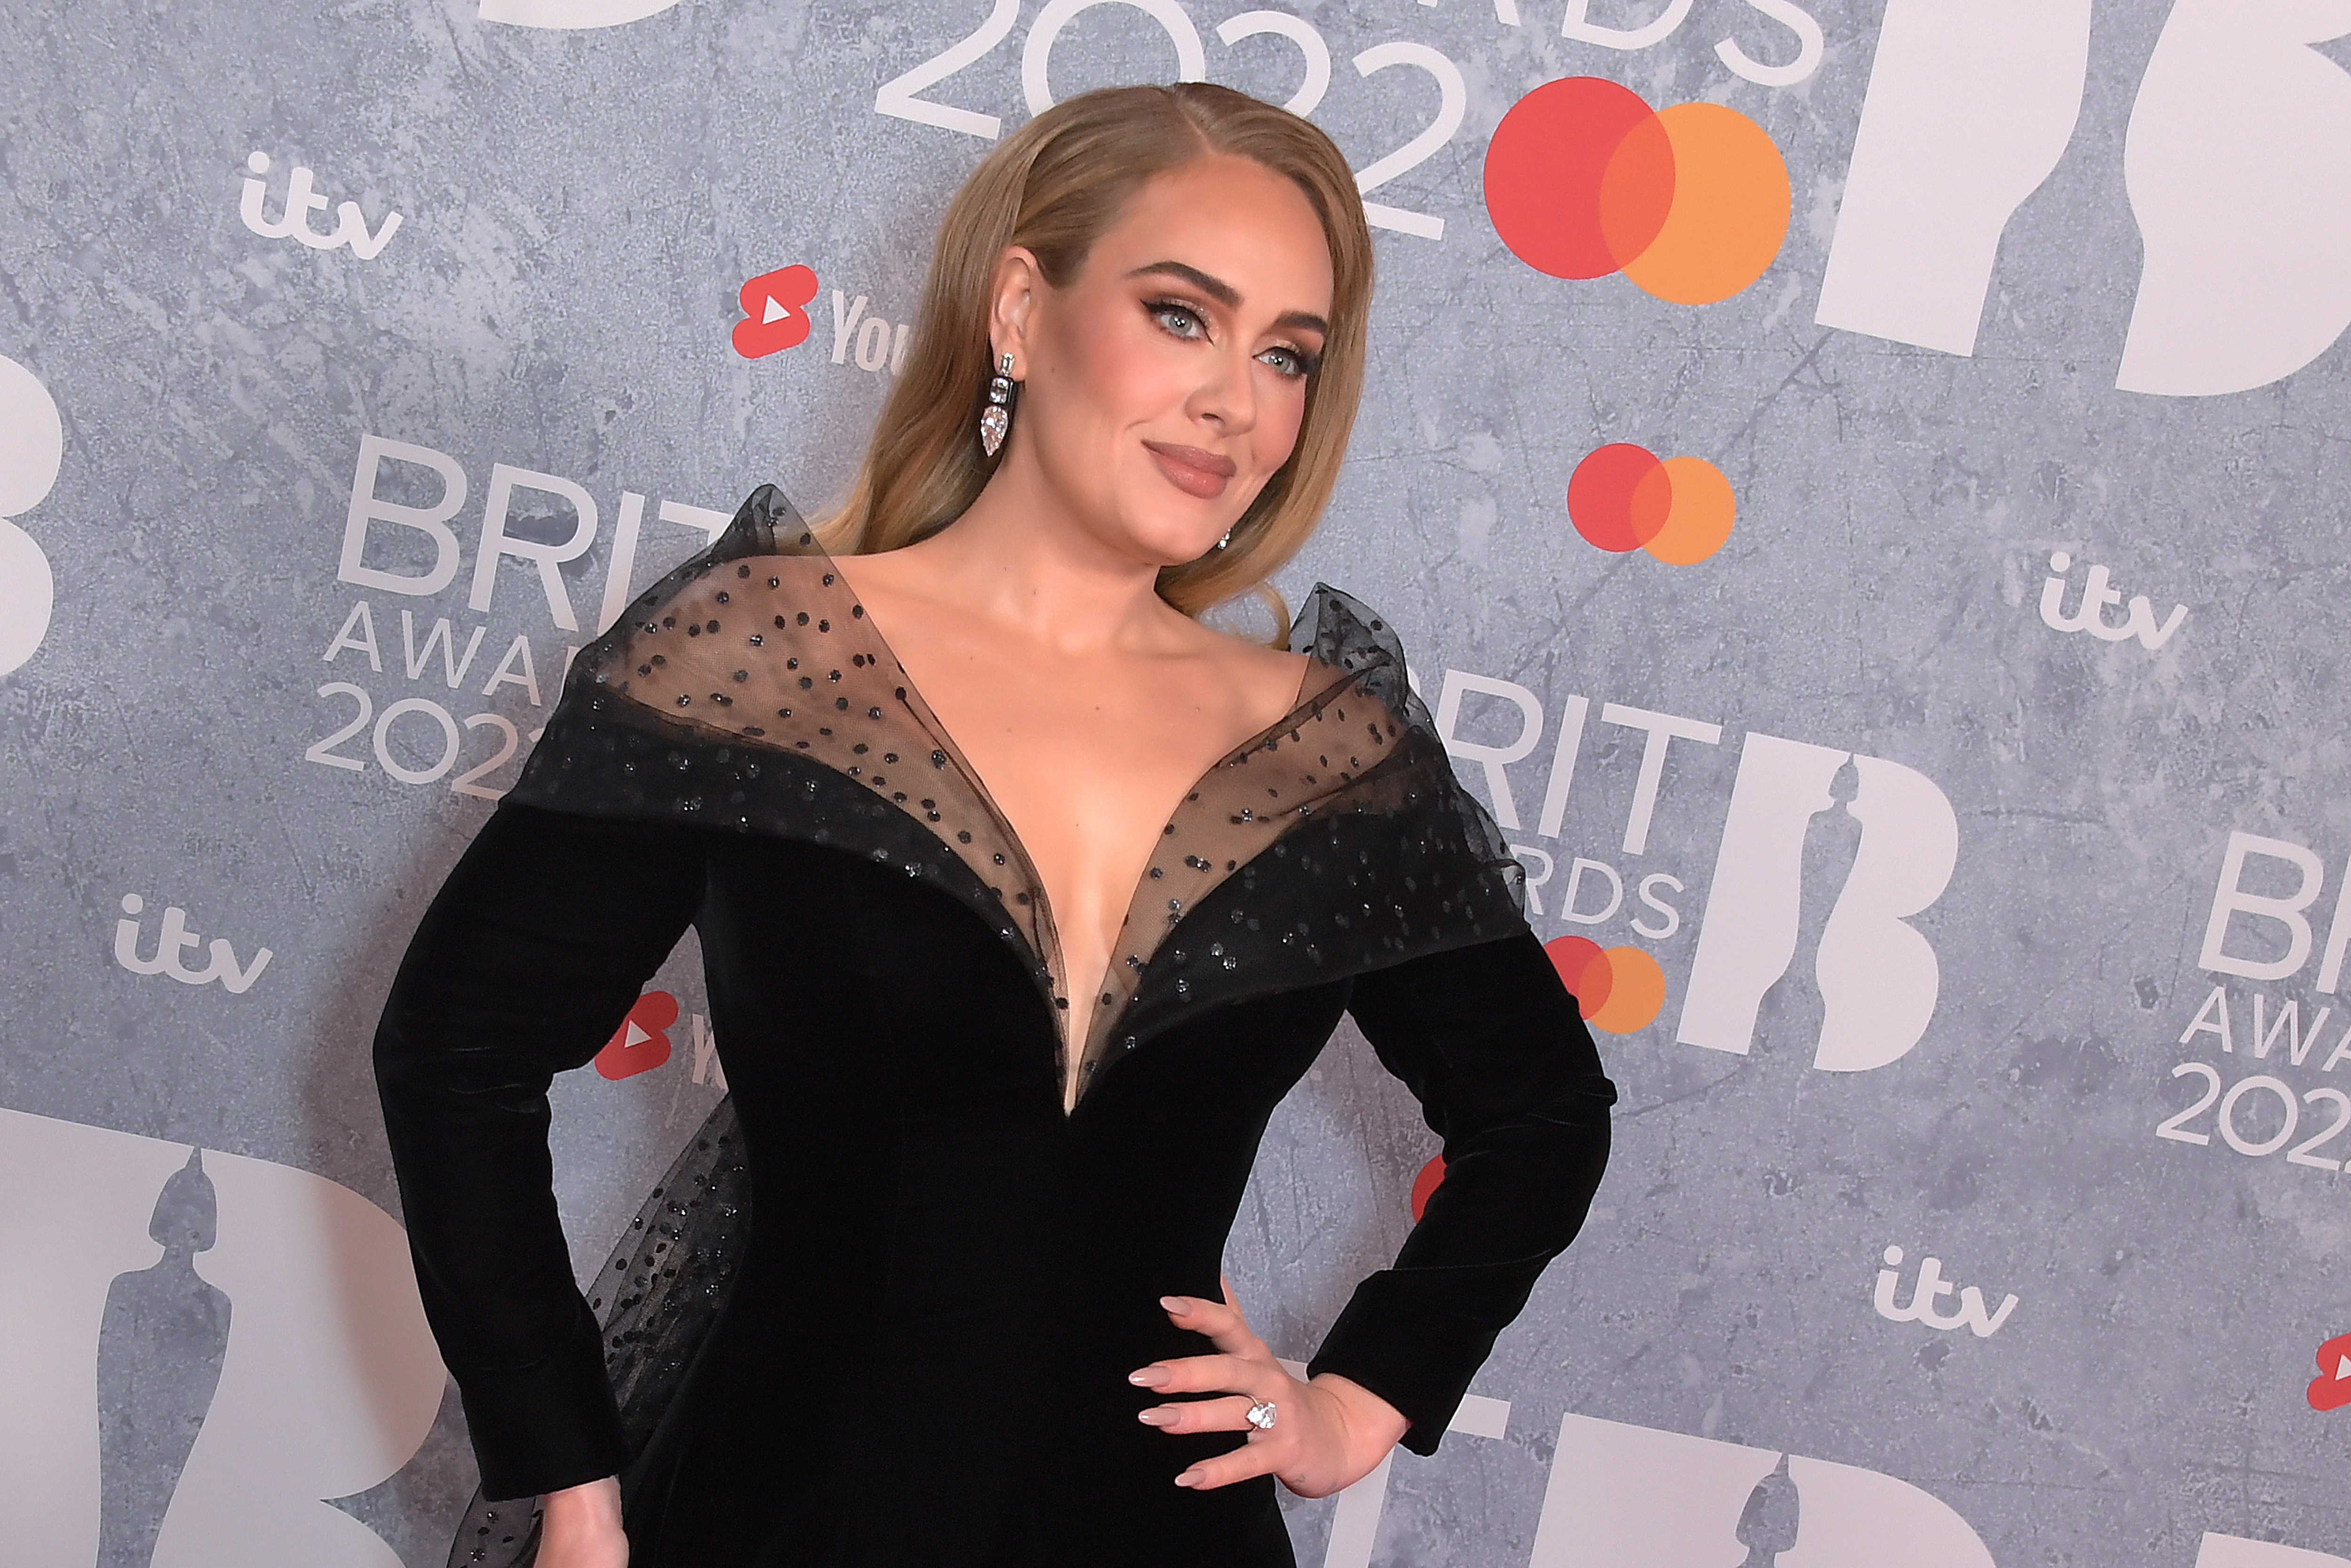 Adele on February 8, 2022 in London, England. | Source: Getty Images